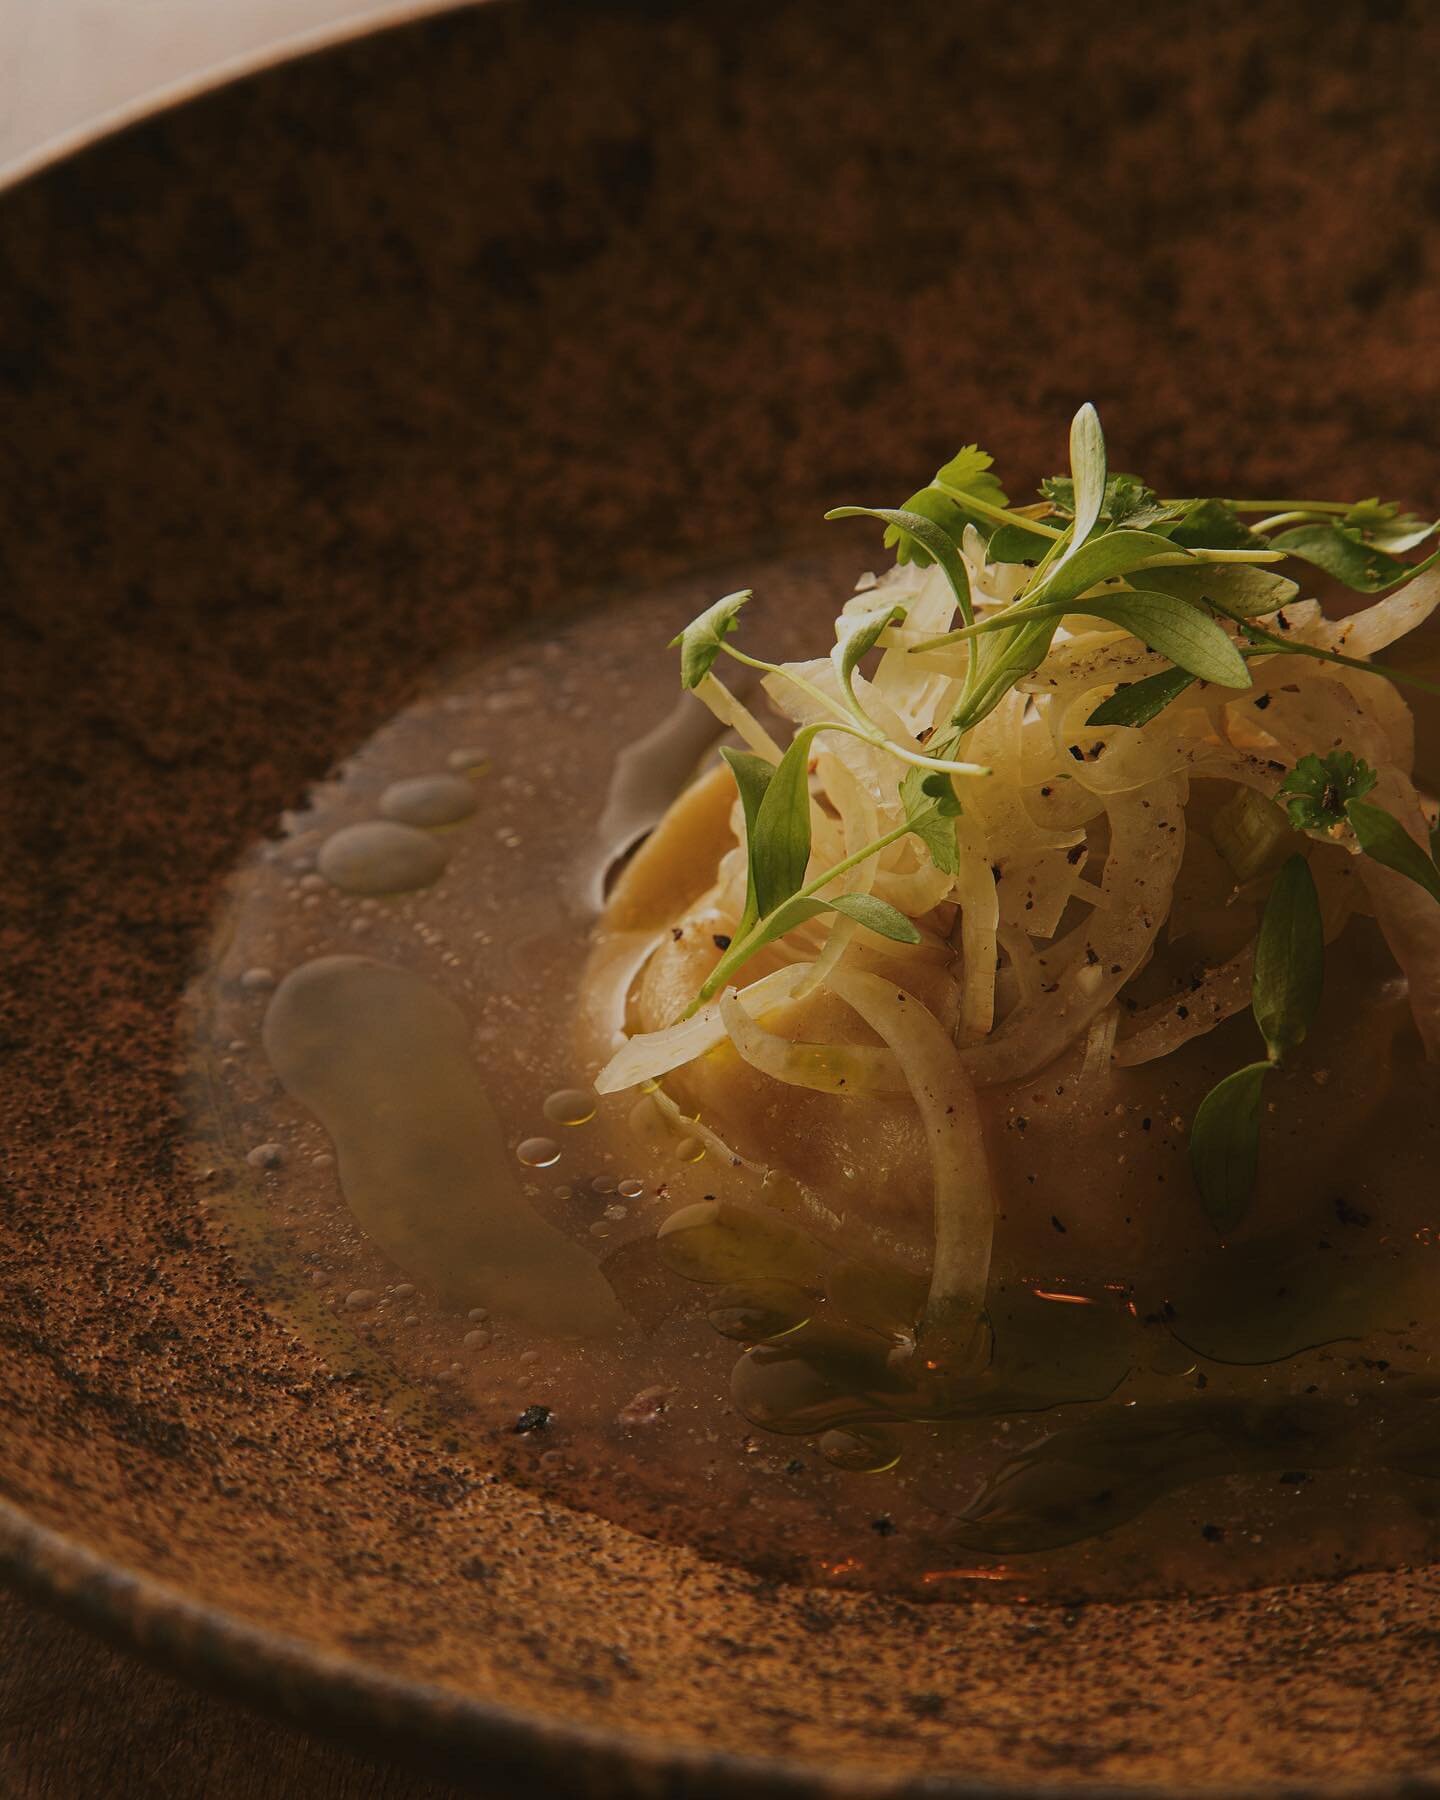 .
Big Island Lamb Raviolo. 
The pasta is adorned with sliced fennel and micro cilantro then immersed in a chicken-beef bone broth which is infused with cilantro oil. We season the dish with preserved black peppercorns from Puna Gardens on the Big Isl